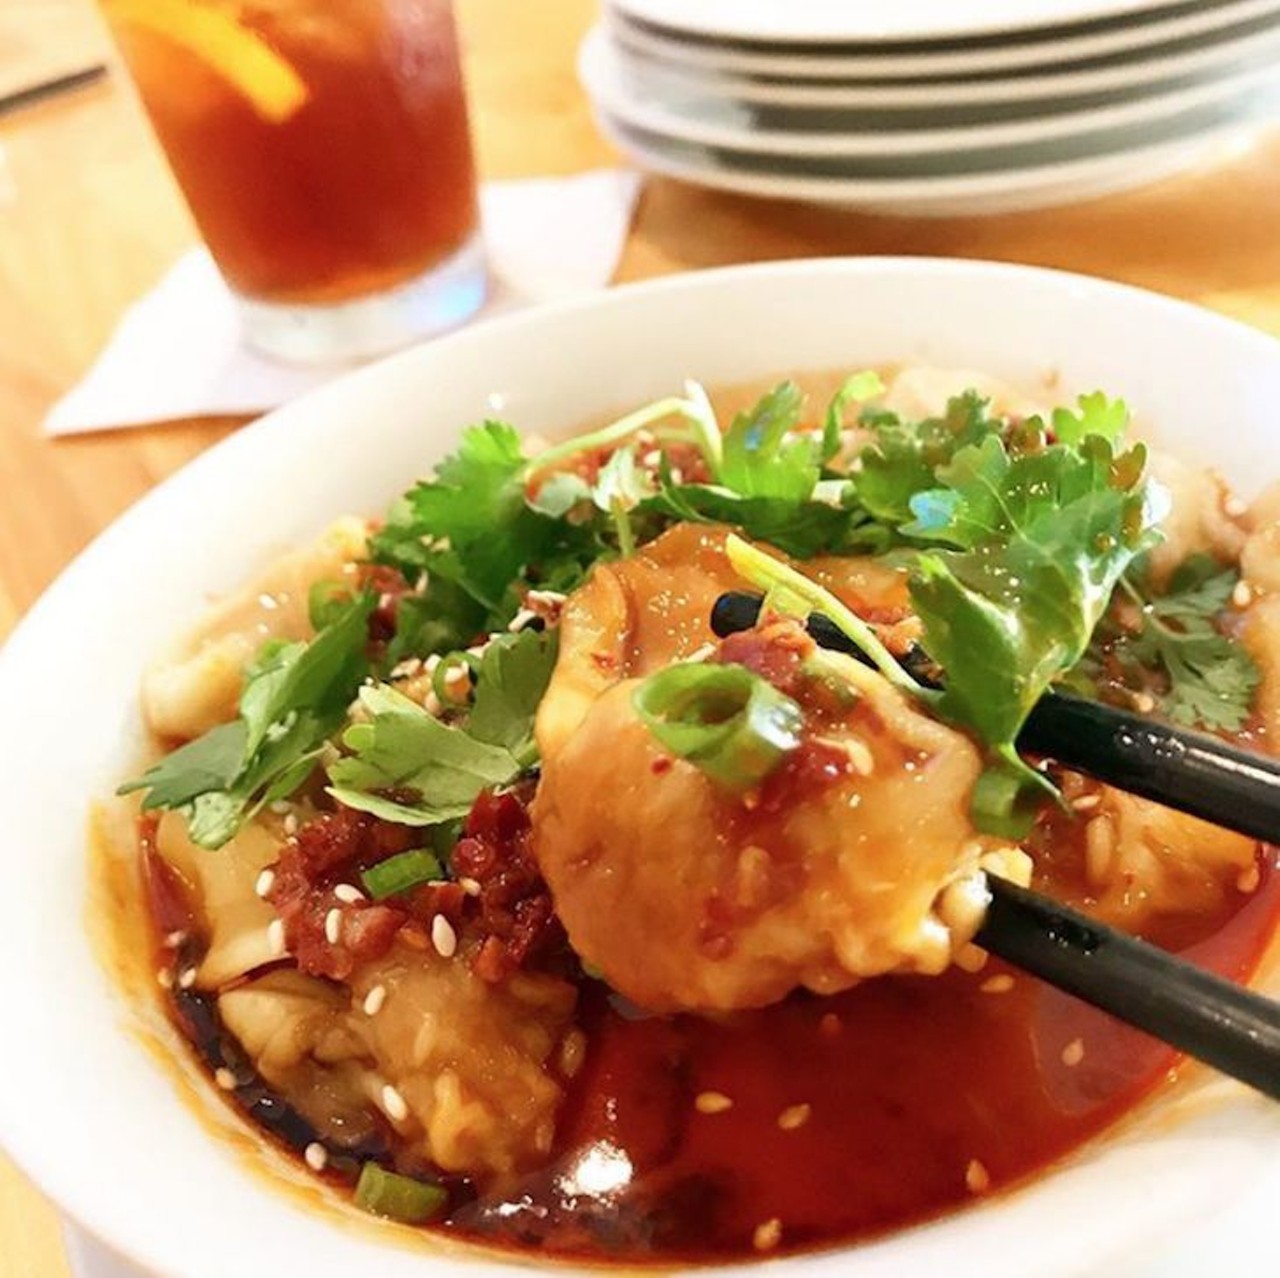 Mamak Asian Street Food
1231 E. Colonial Drive | 407-270-4688
Mamak serves Malaysian tapas that show you a whole new world of flavors like roti, roast duck and kari meatballs. Noodle soups, rice and wok dishes are also available if you need something a little more familiar.
Photo via mamakorlando/Instagram